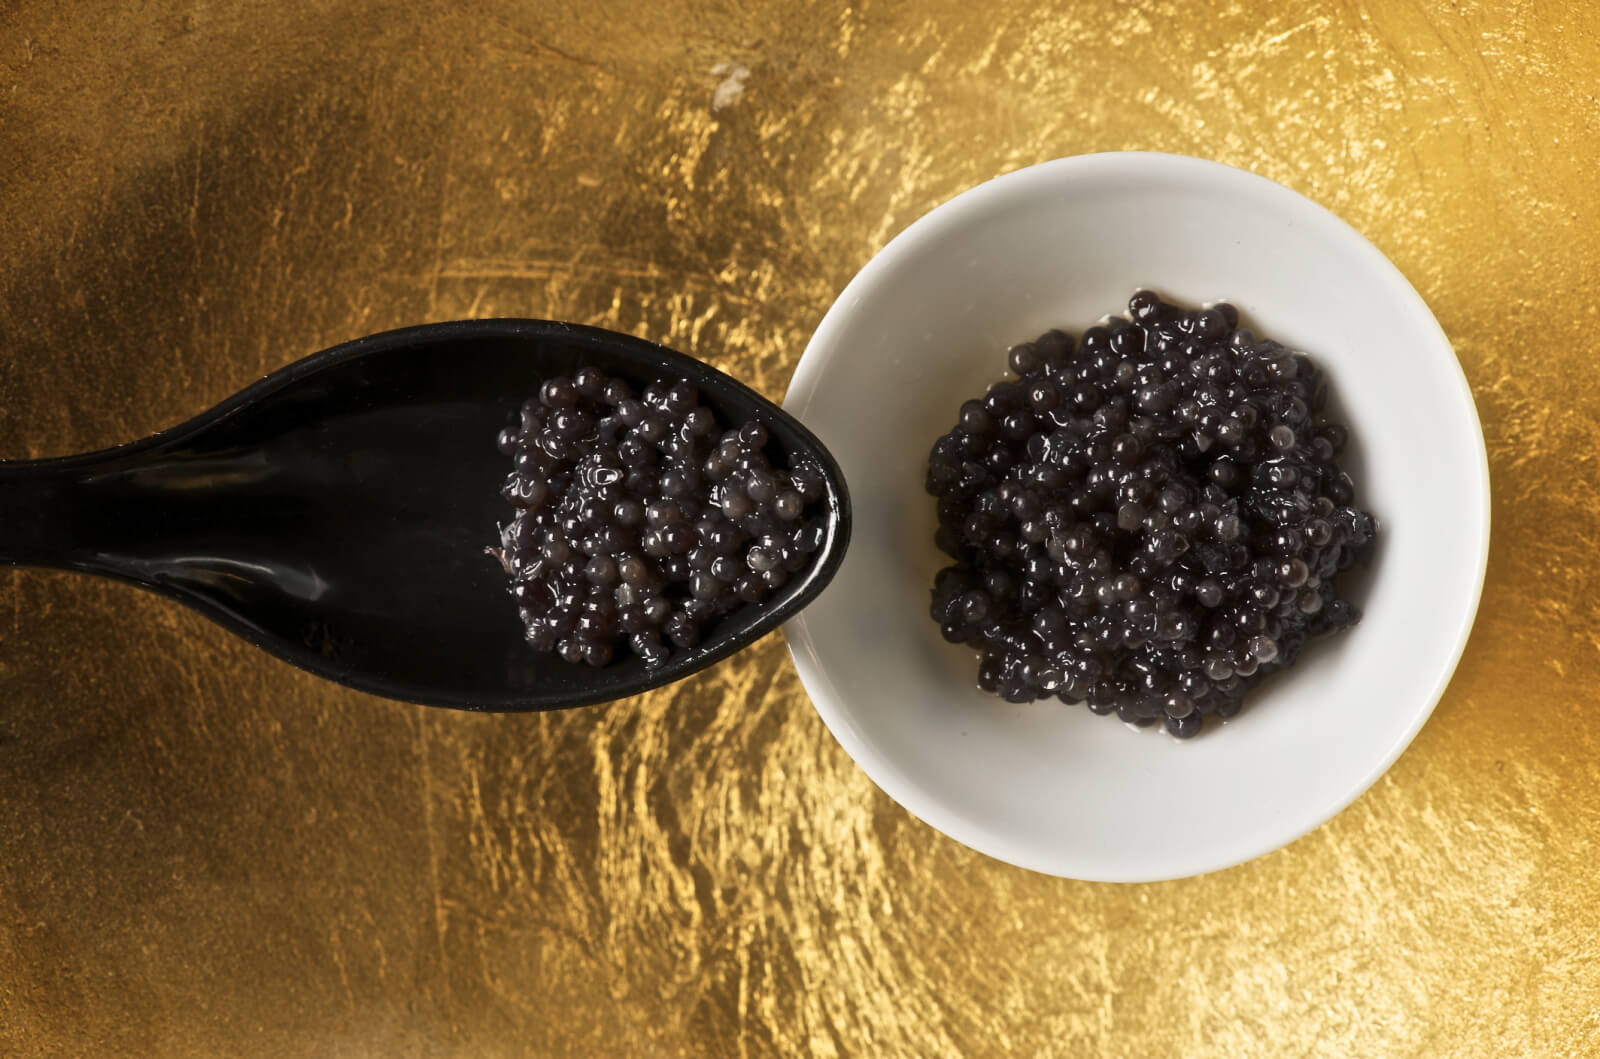 Maria-Galland-Cell-Rejuvenating-Caviar-Mask-81-abloomnova.net_-1600x1059 Why caviar is good for the skin